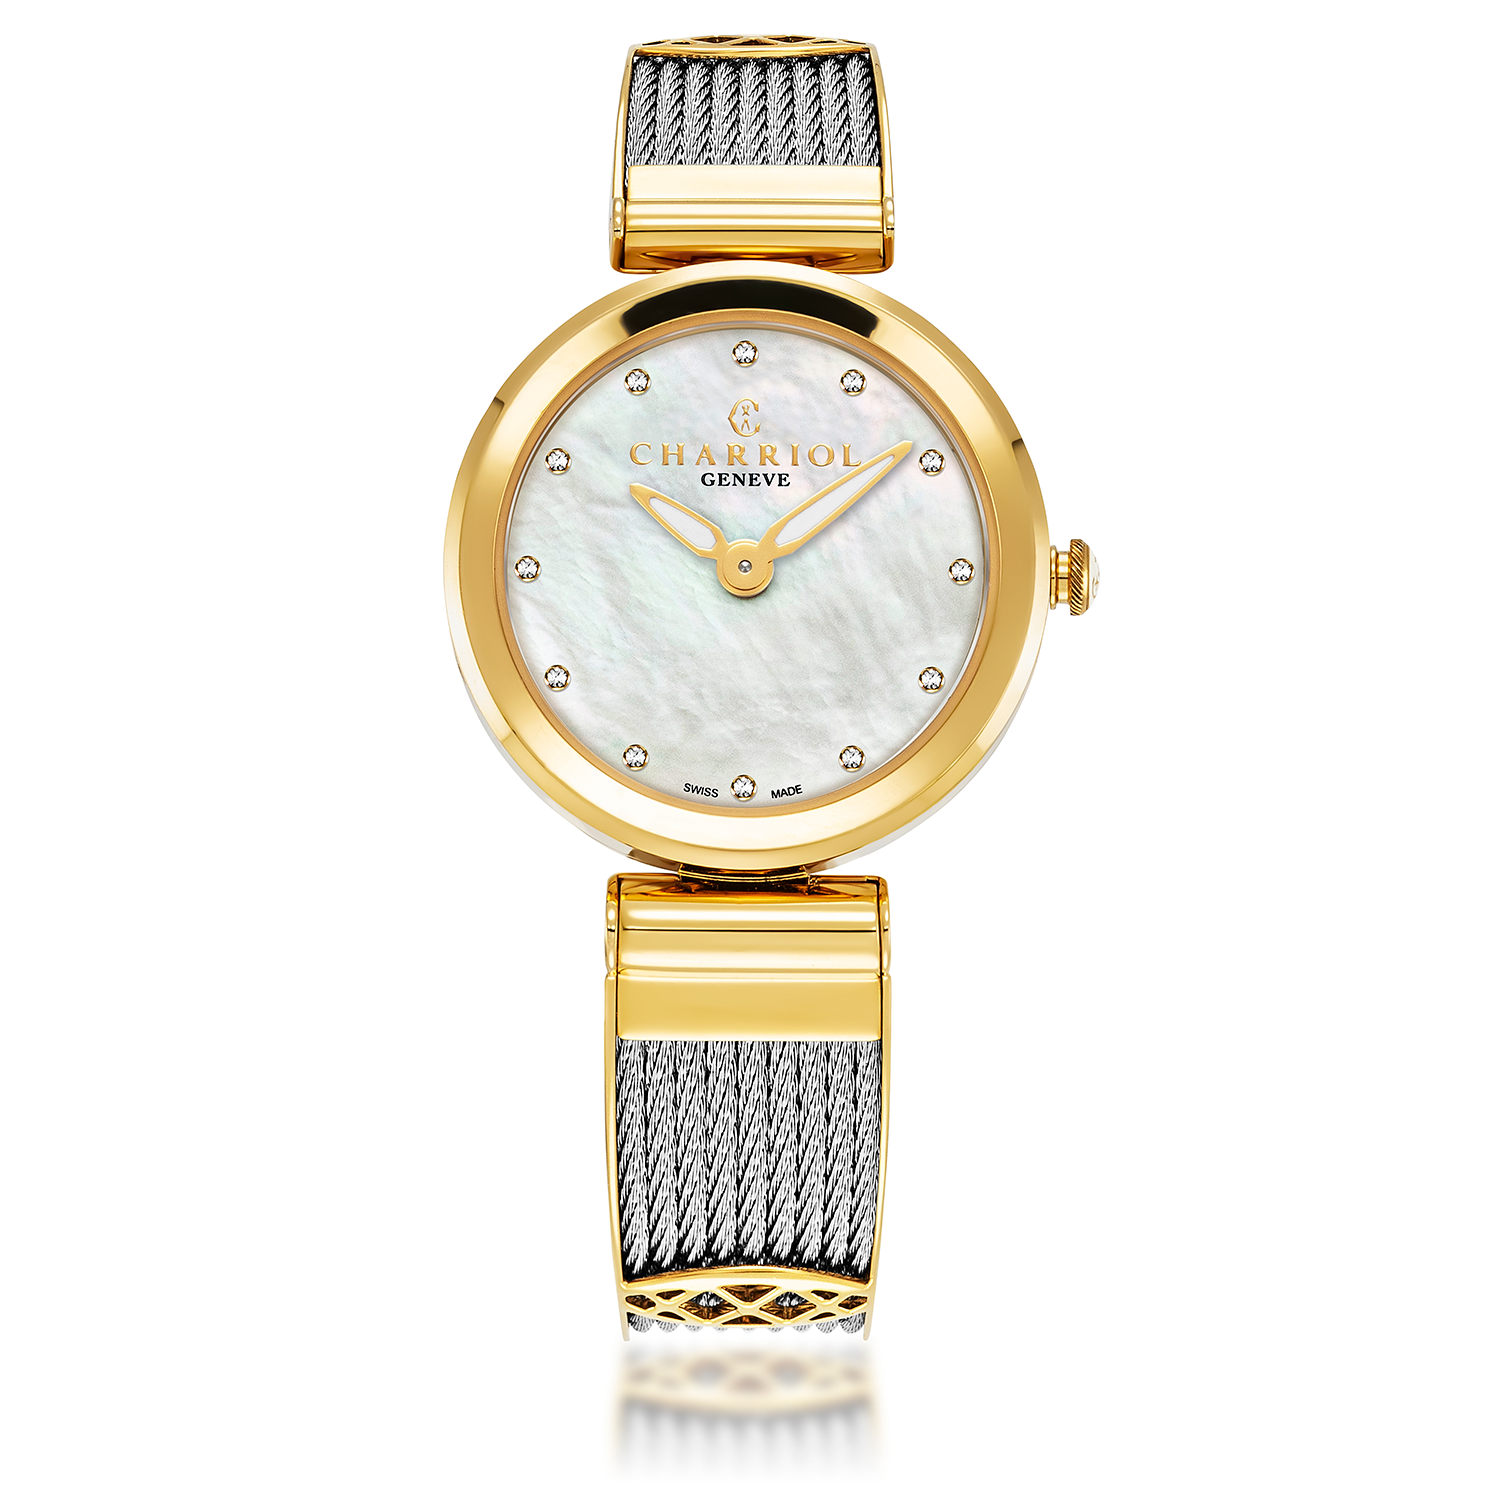 FOREVER, 32MM, QUARTZ CALIBRE, MOTHER-OF-PEARL WITH 12 SIMILIS DIAL, YELLOW GOLD PVD BEZEL, STEEL CABLE BRACELET & YELLOW GOLD PVD DECORS - Charriol Geneve -  Watch